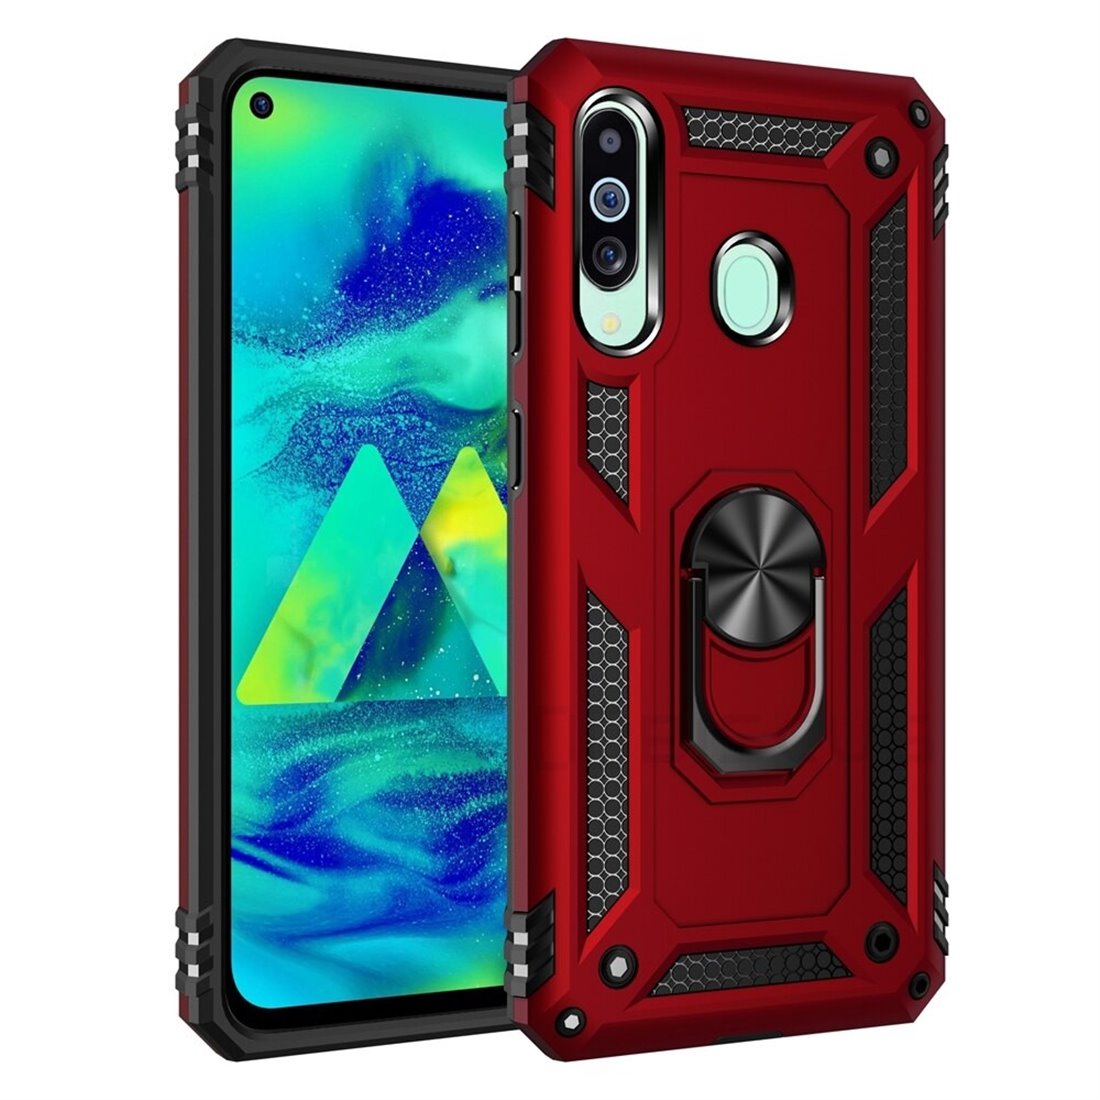 Samsung Galaxy A60 Plastic Red Back Cover - Solid ring